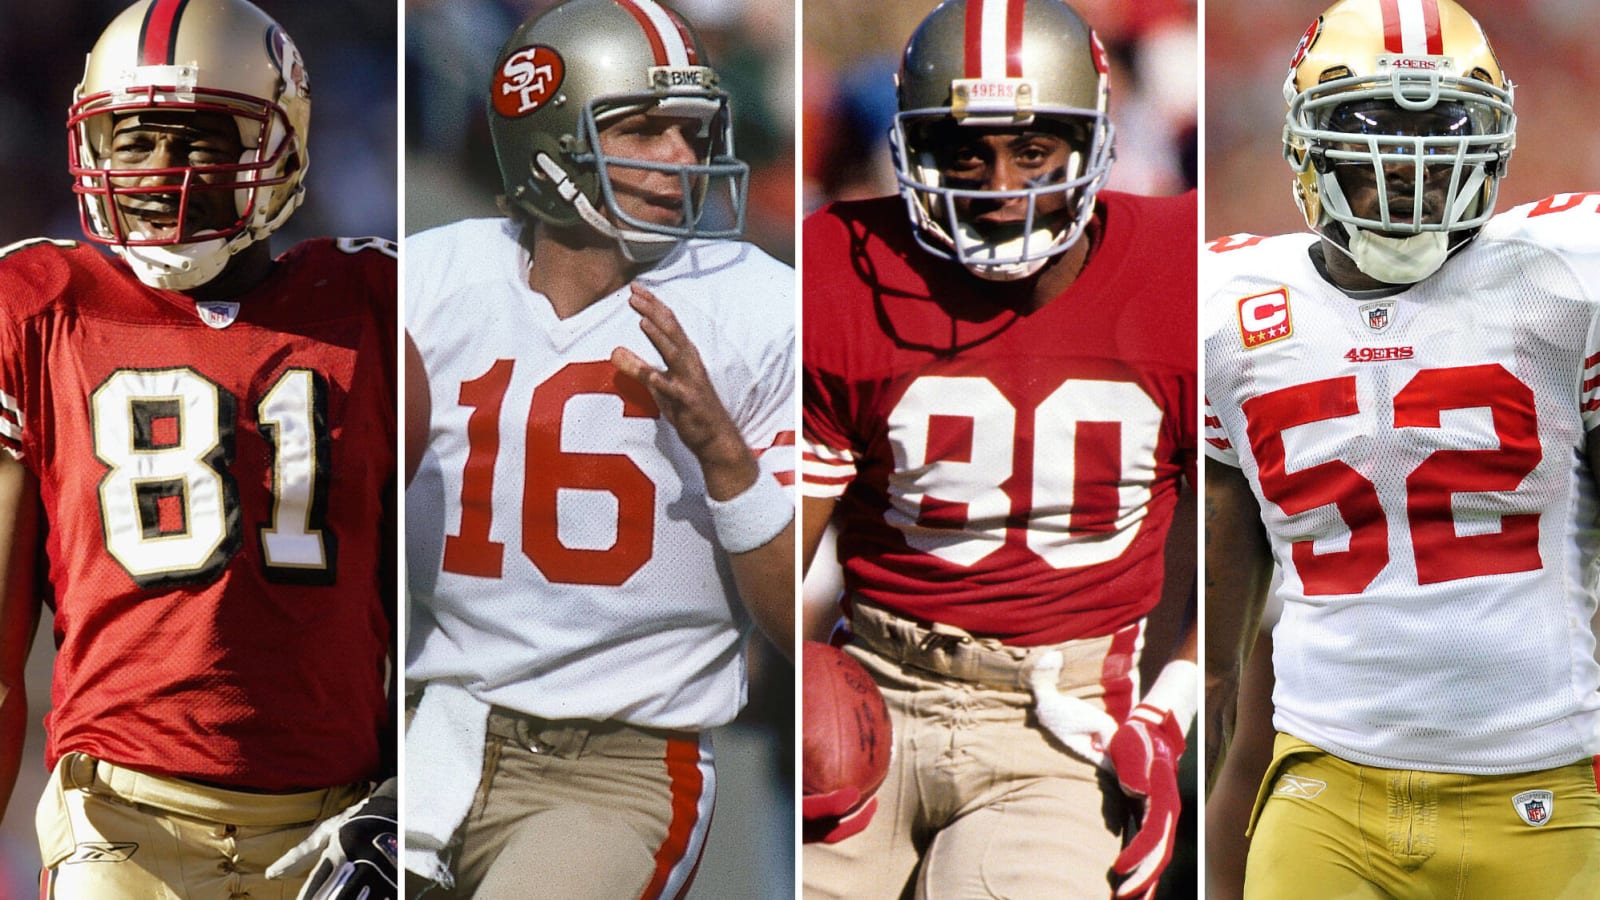 49ers all time greats